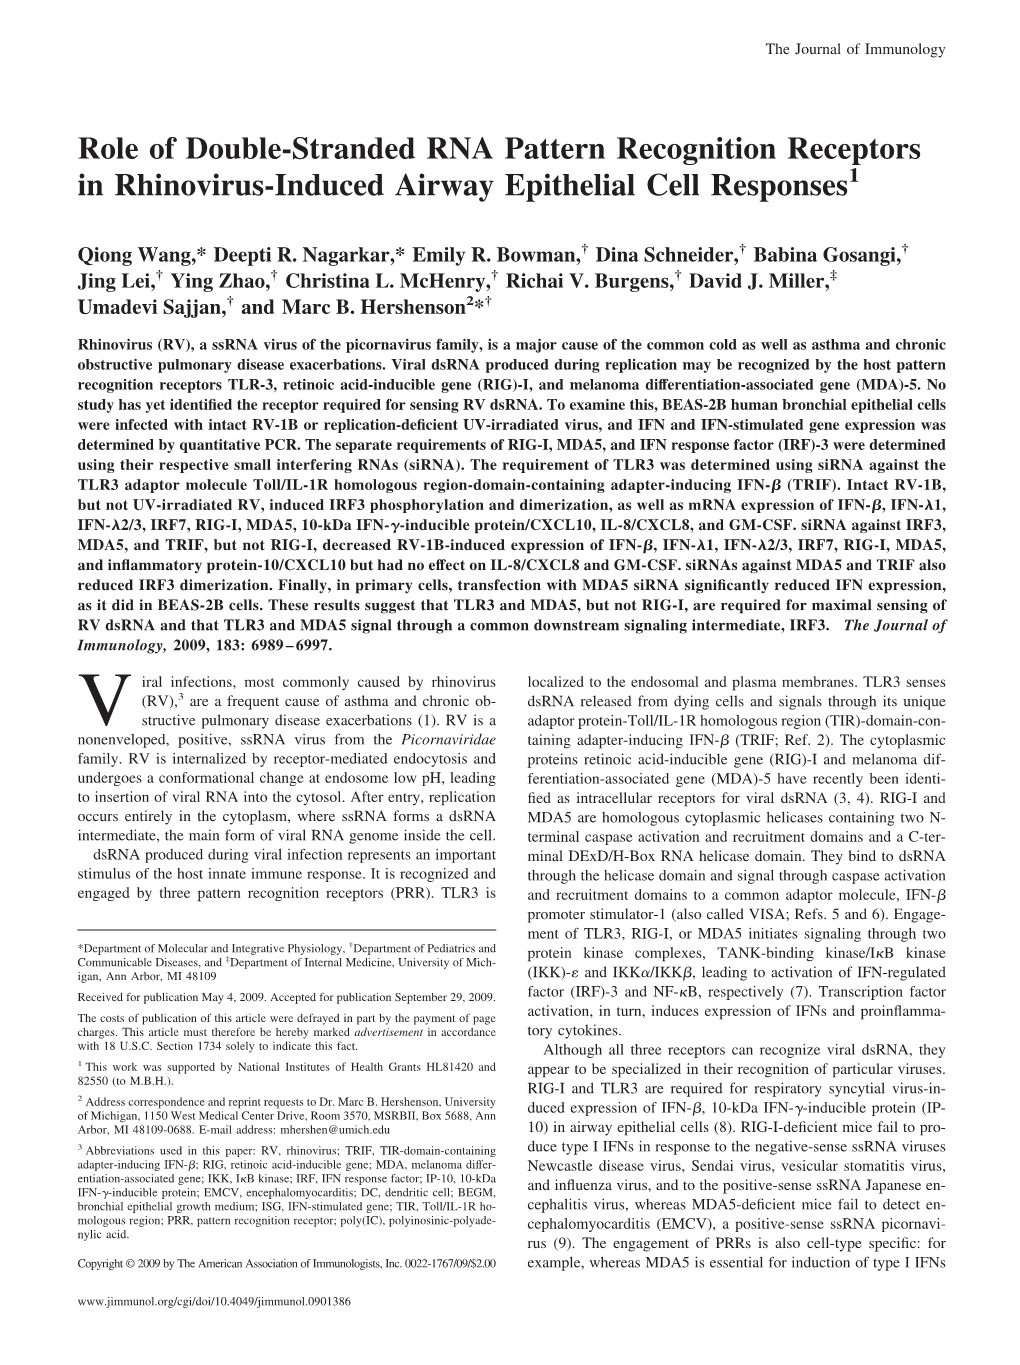 Airway Epithelial Cell Responses Rhinovirus-Induced Recognition